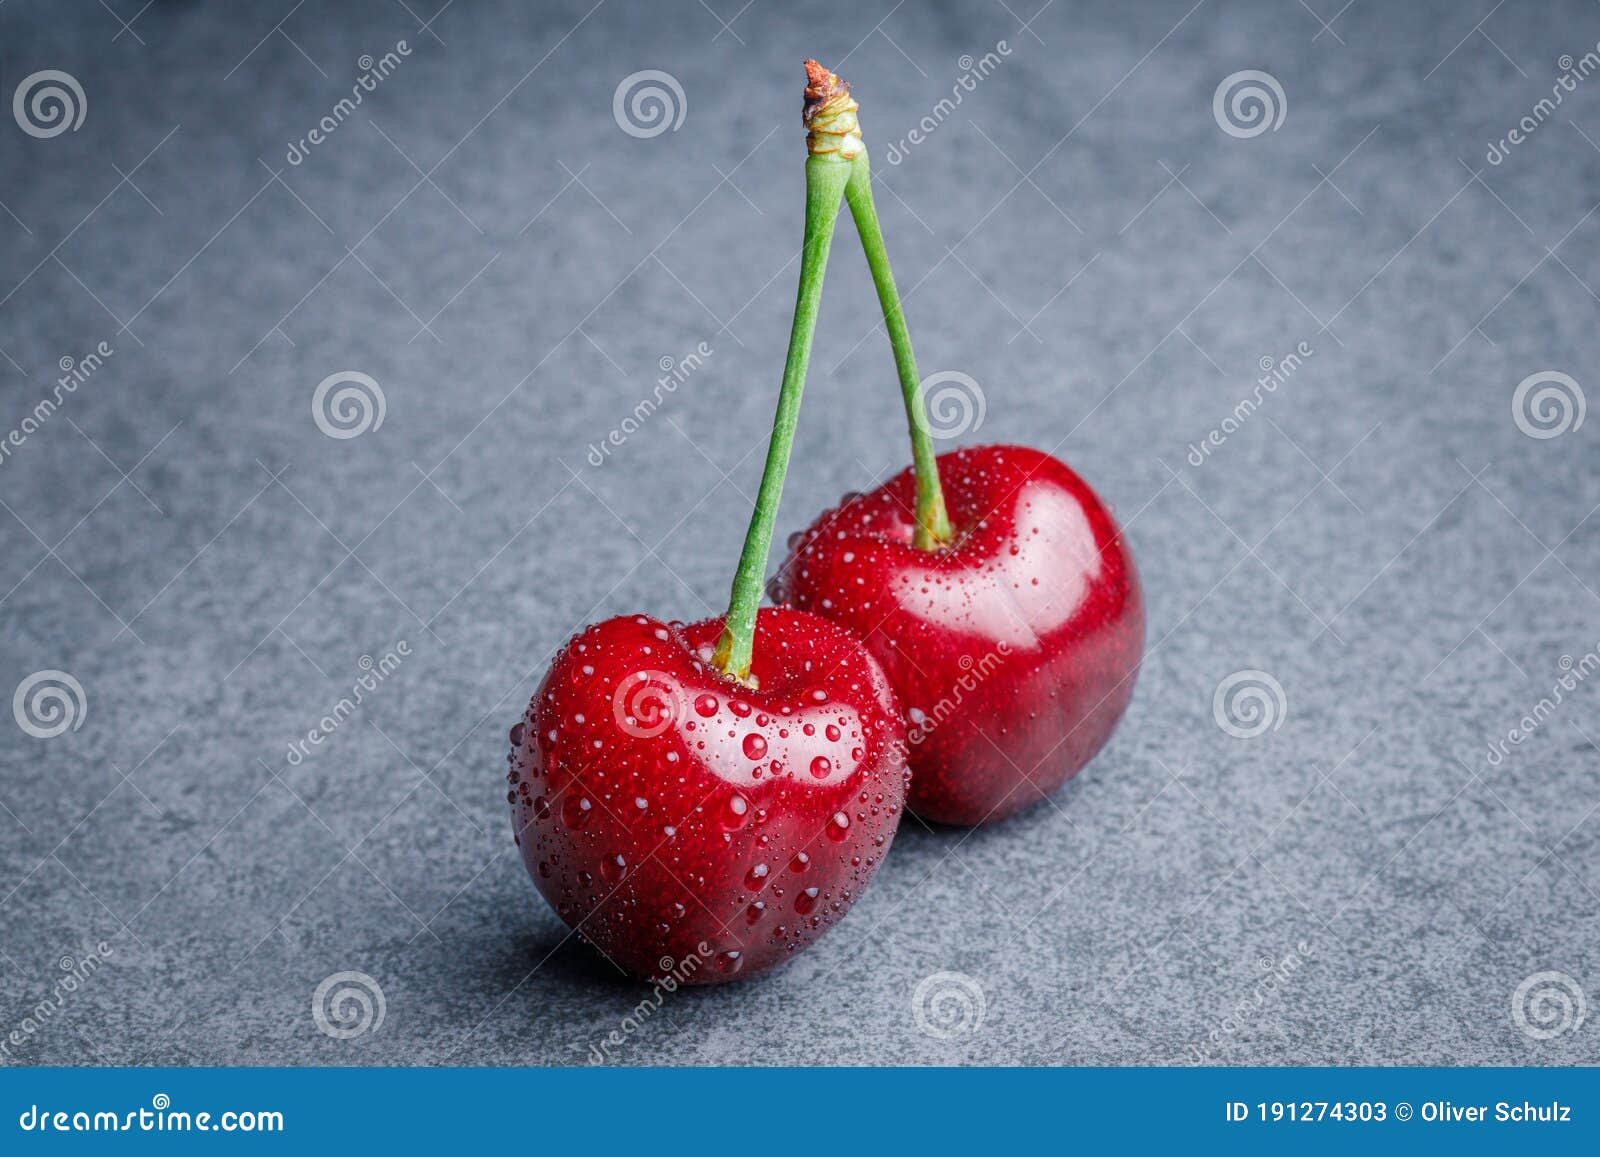 7 698 Red Round Fruit Stem Photos Free Royalty Free Stock Photos From Dreamstime